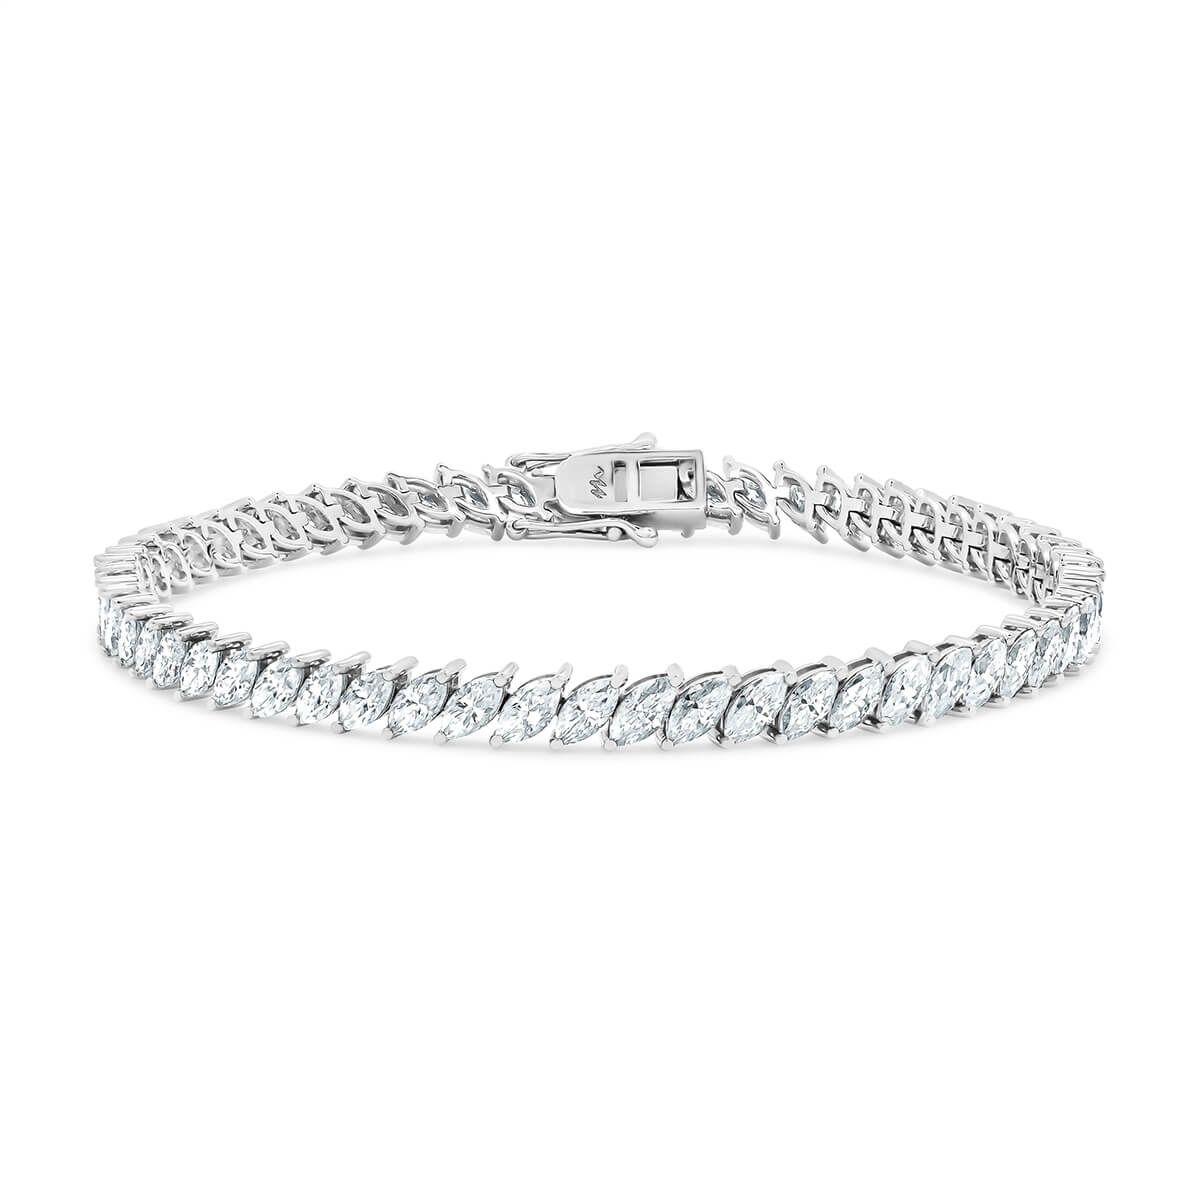 Mira Sn Moissanite Tennis Bracelet With Marquise Shape Set On An Angle